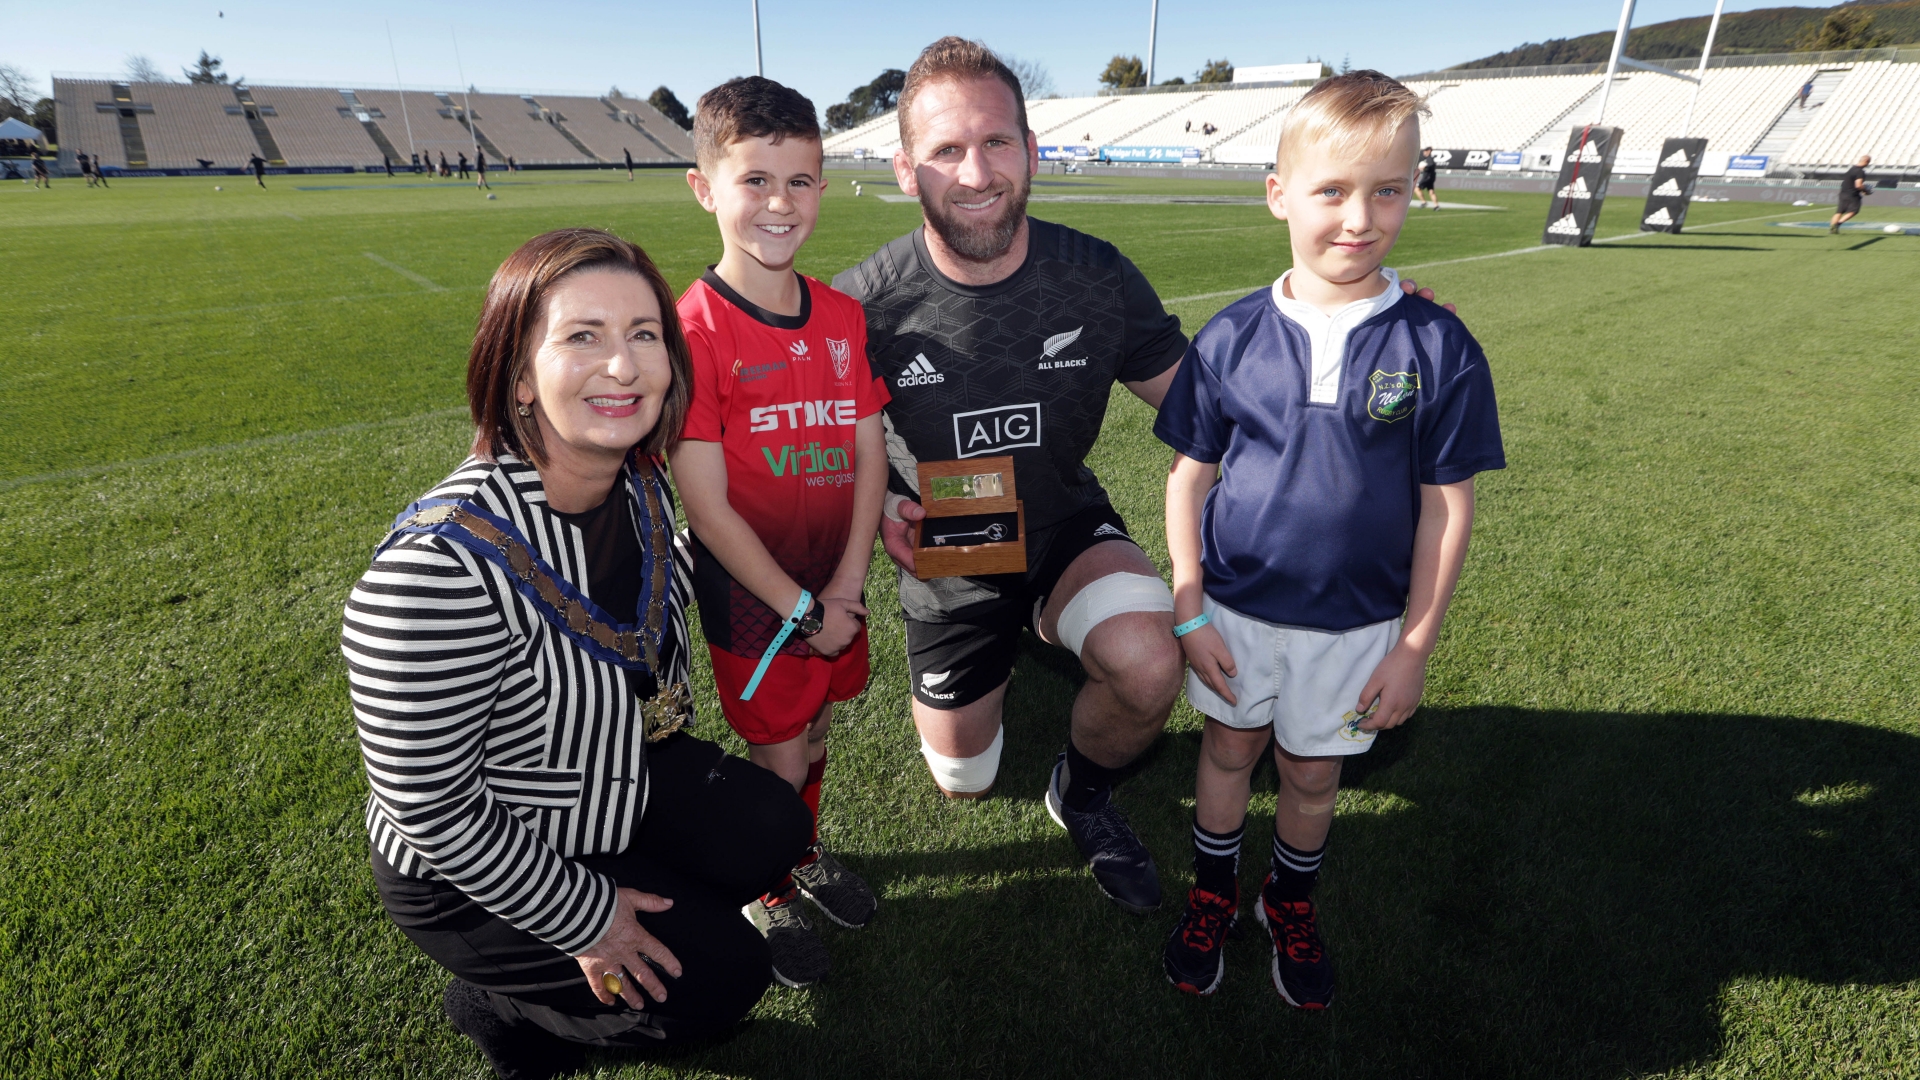 Mayor Rachel Reese presents the Key to the City to All Blacks captain Kieran Read, flanked by Rico Groome, 9, of Stoke Rugby Club, (red jersey) and Xavier Dickson-Paterson, 8, of Nelson Rugby Club (blue jersey).  